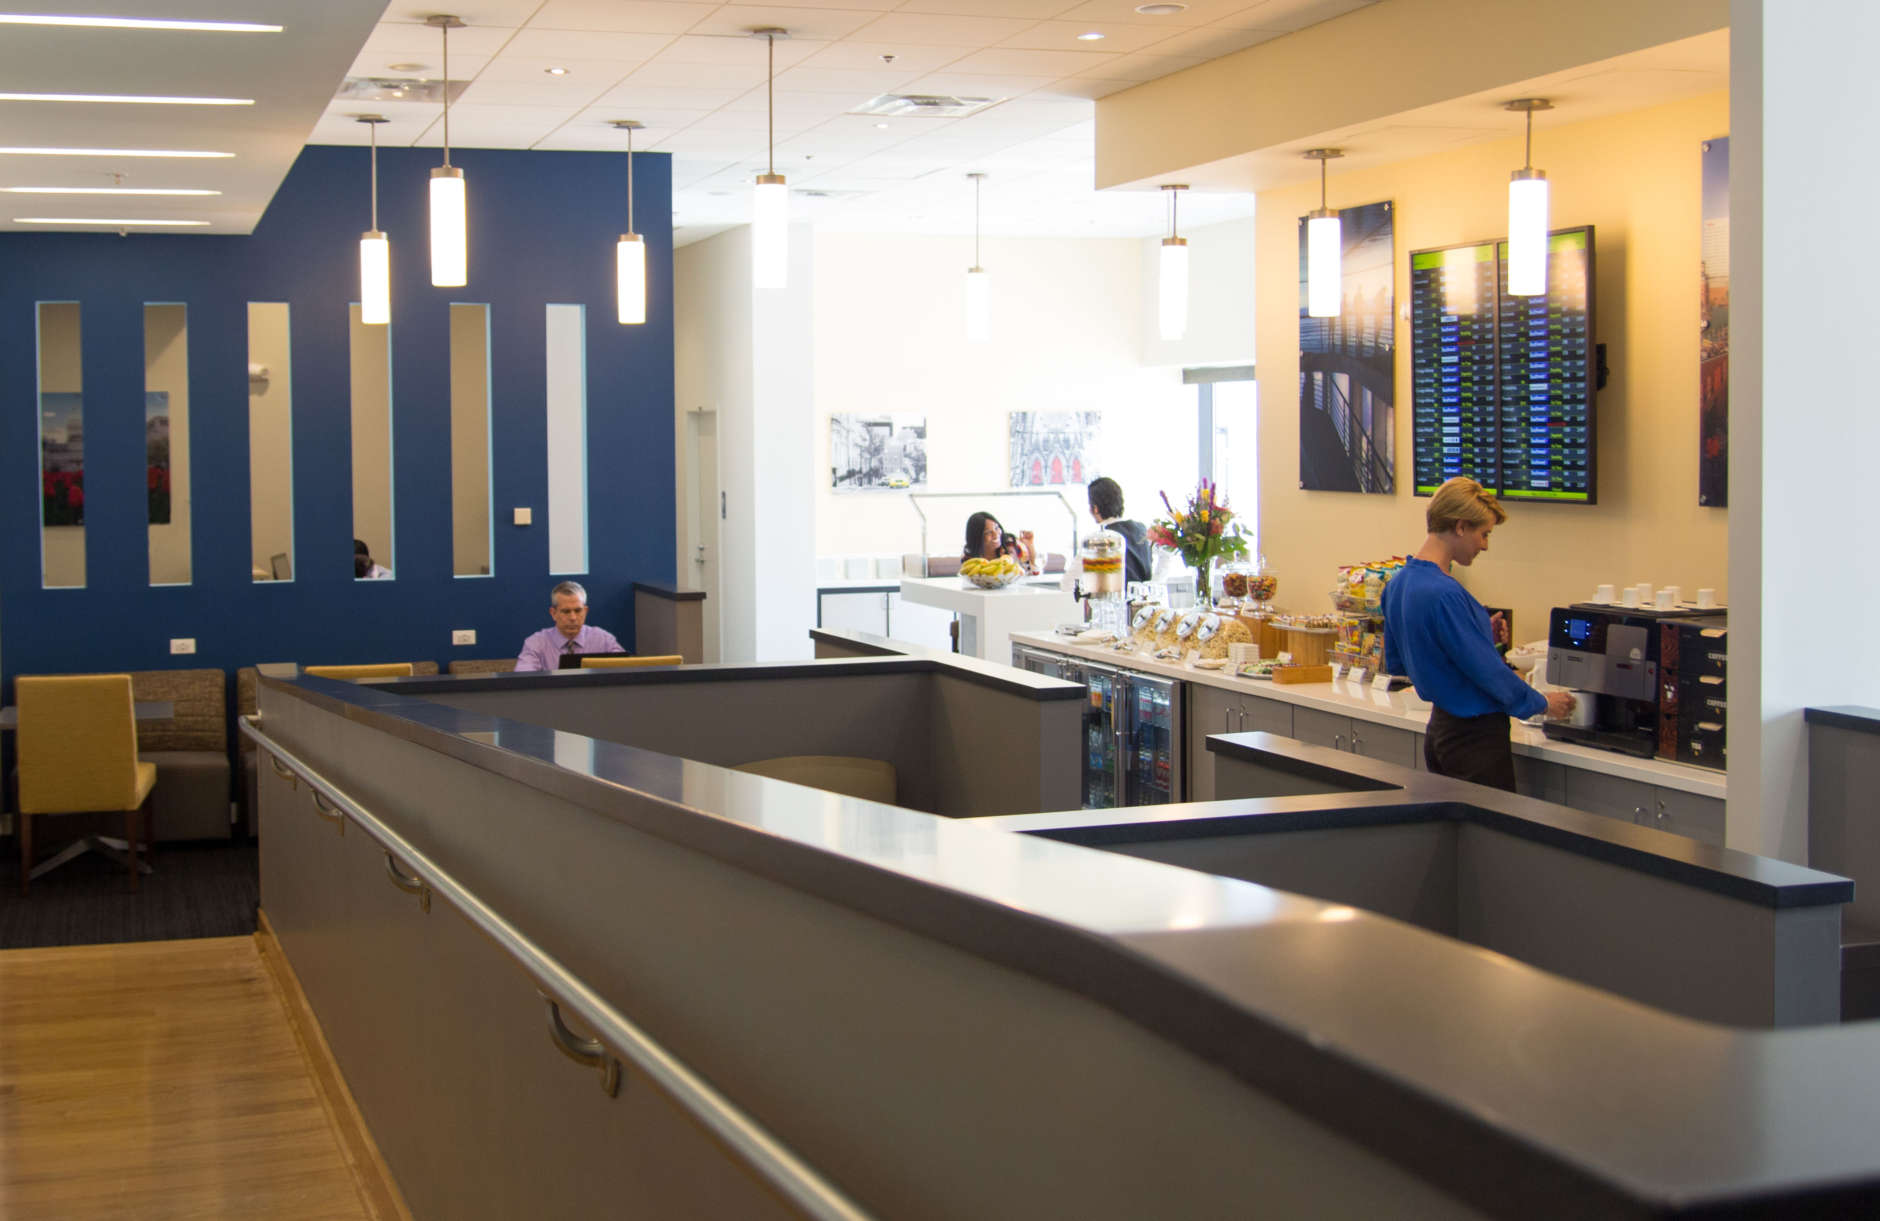 For $40, The Club BWI will give club members access to a 2,200-square-foot lounge with relaxing and working zones including free snacks and beverages, including beer, wine and liquor. (Courtesy Airport Lounge Development Inc.)